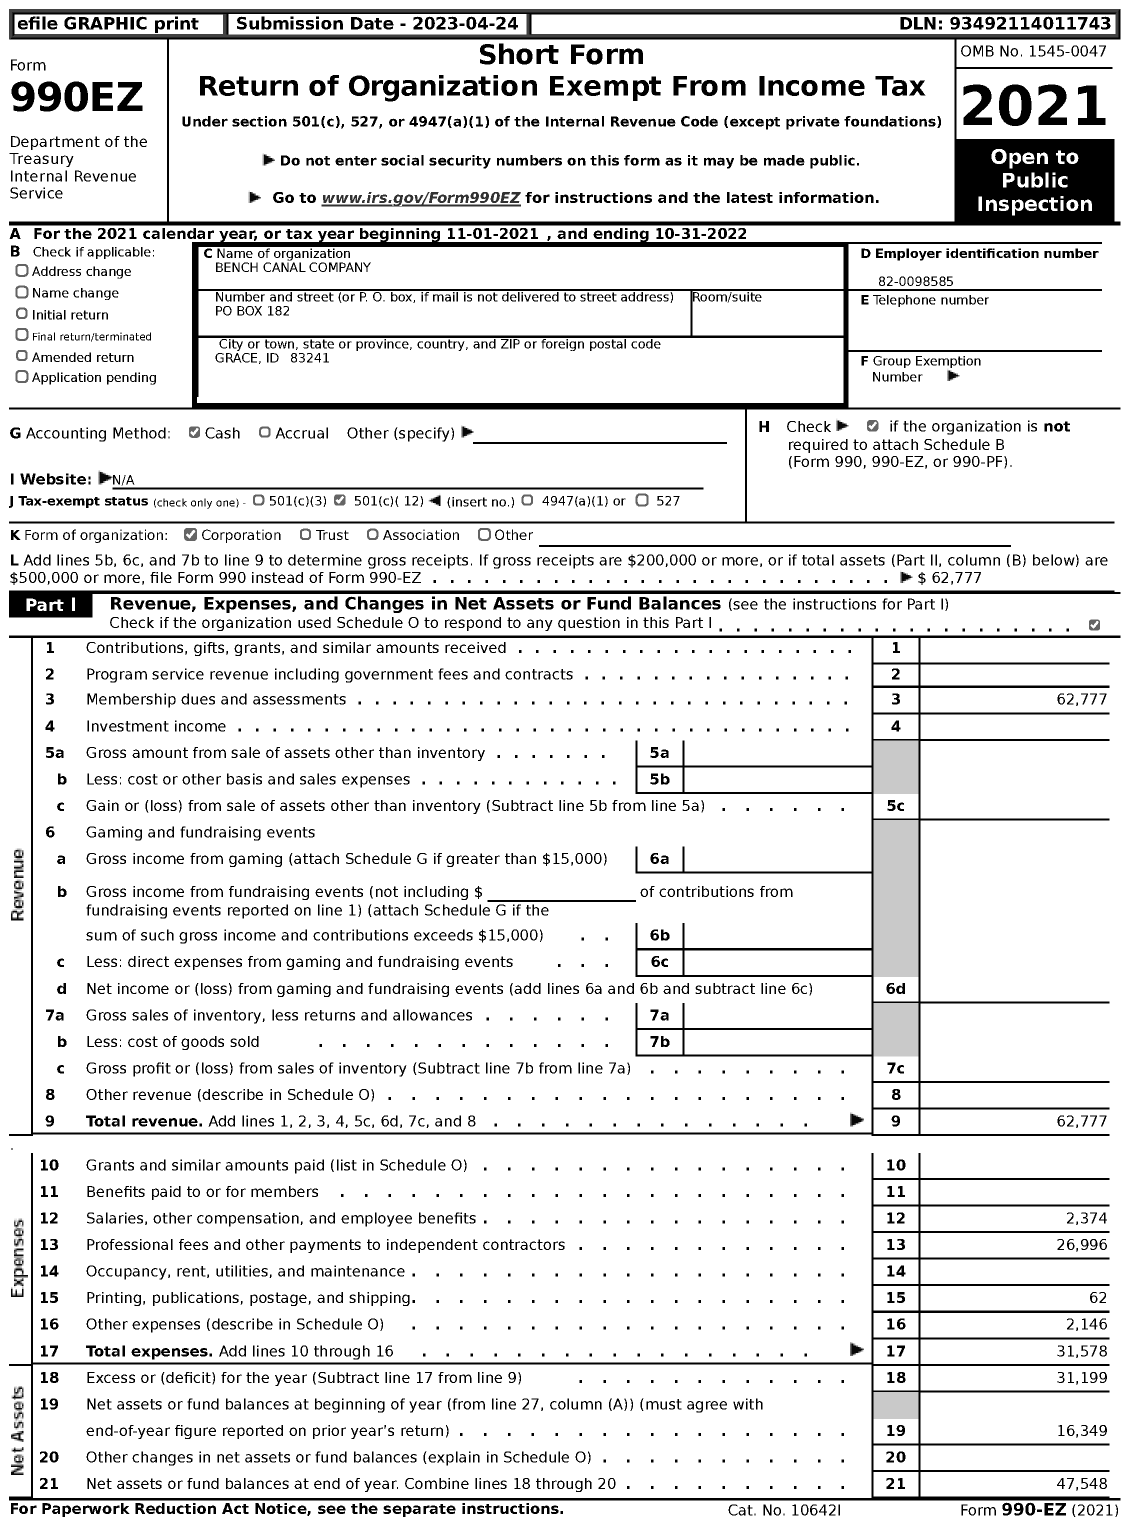 Image of first page of 2021 Form 990EZ for Bench Canal Company